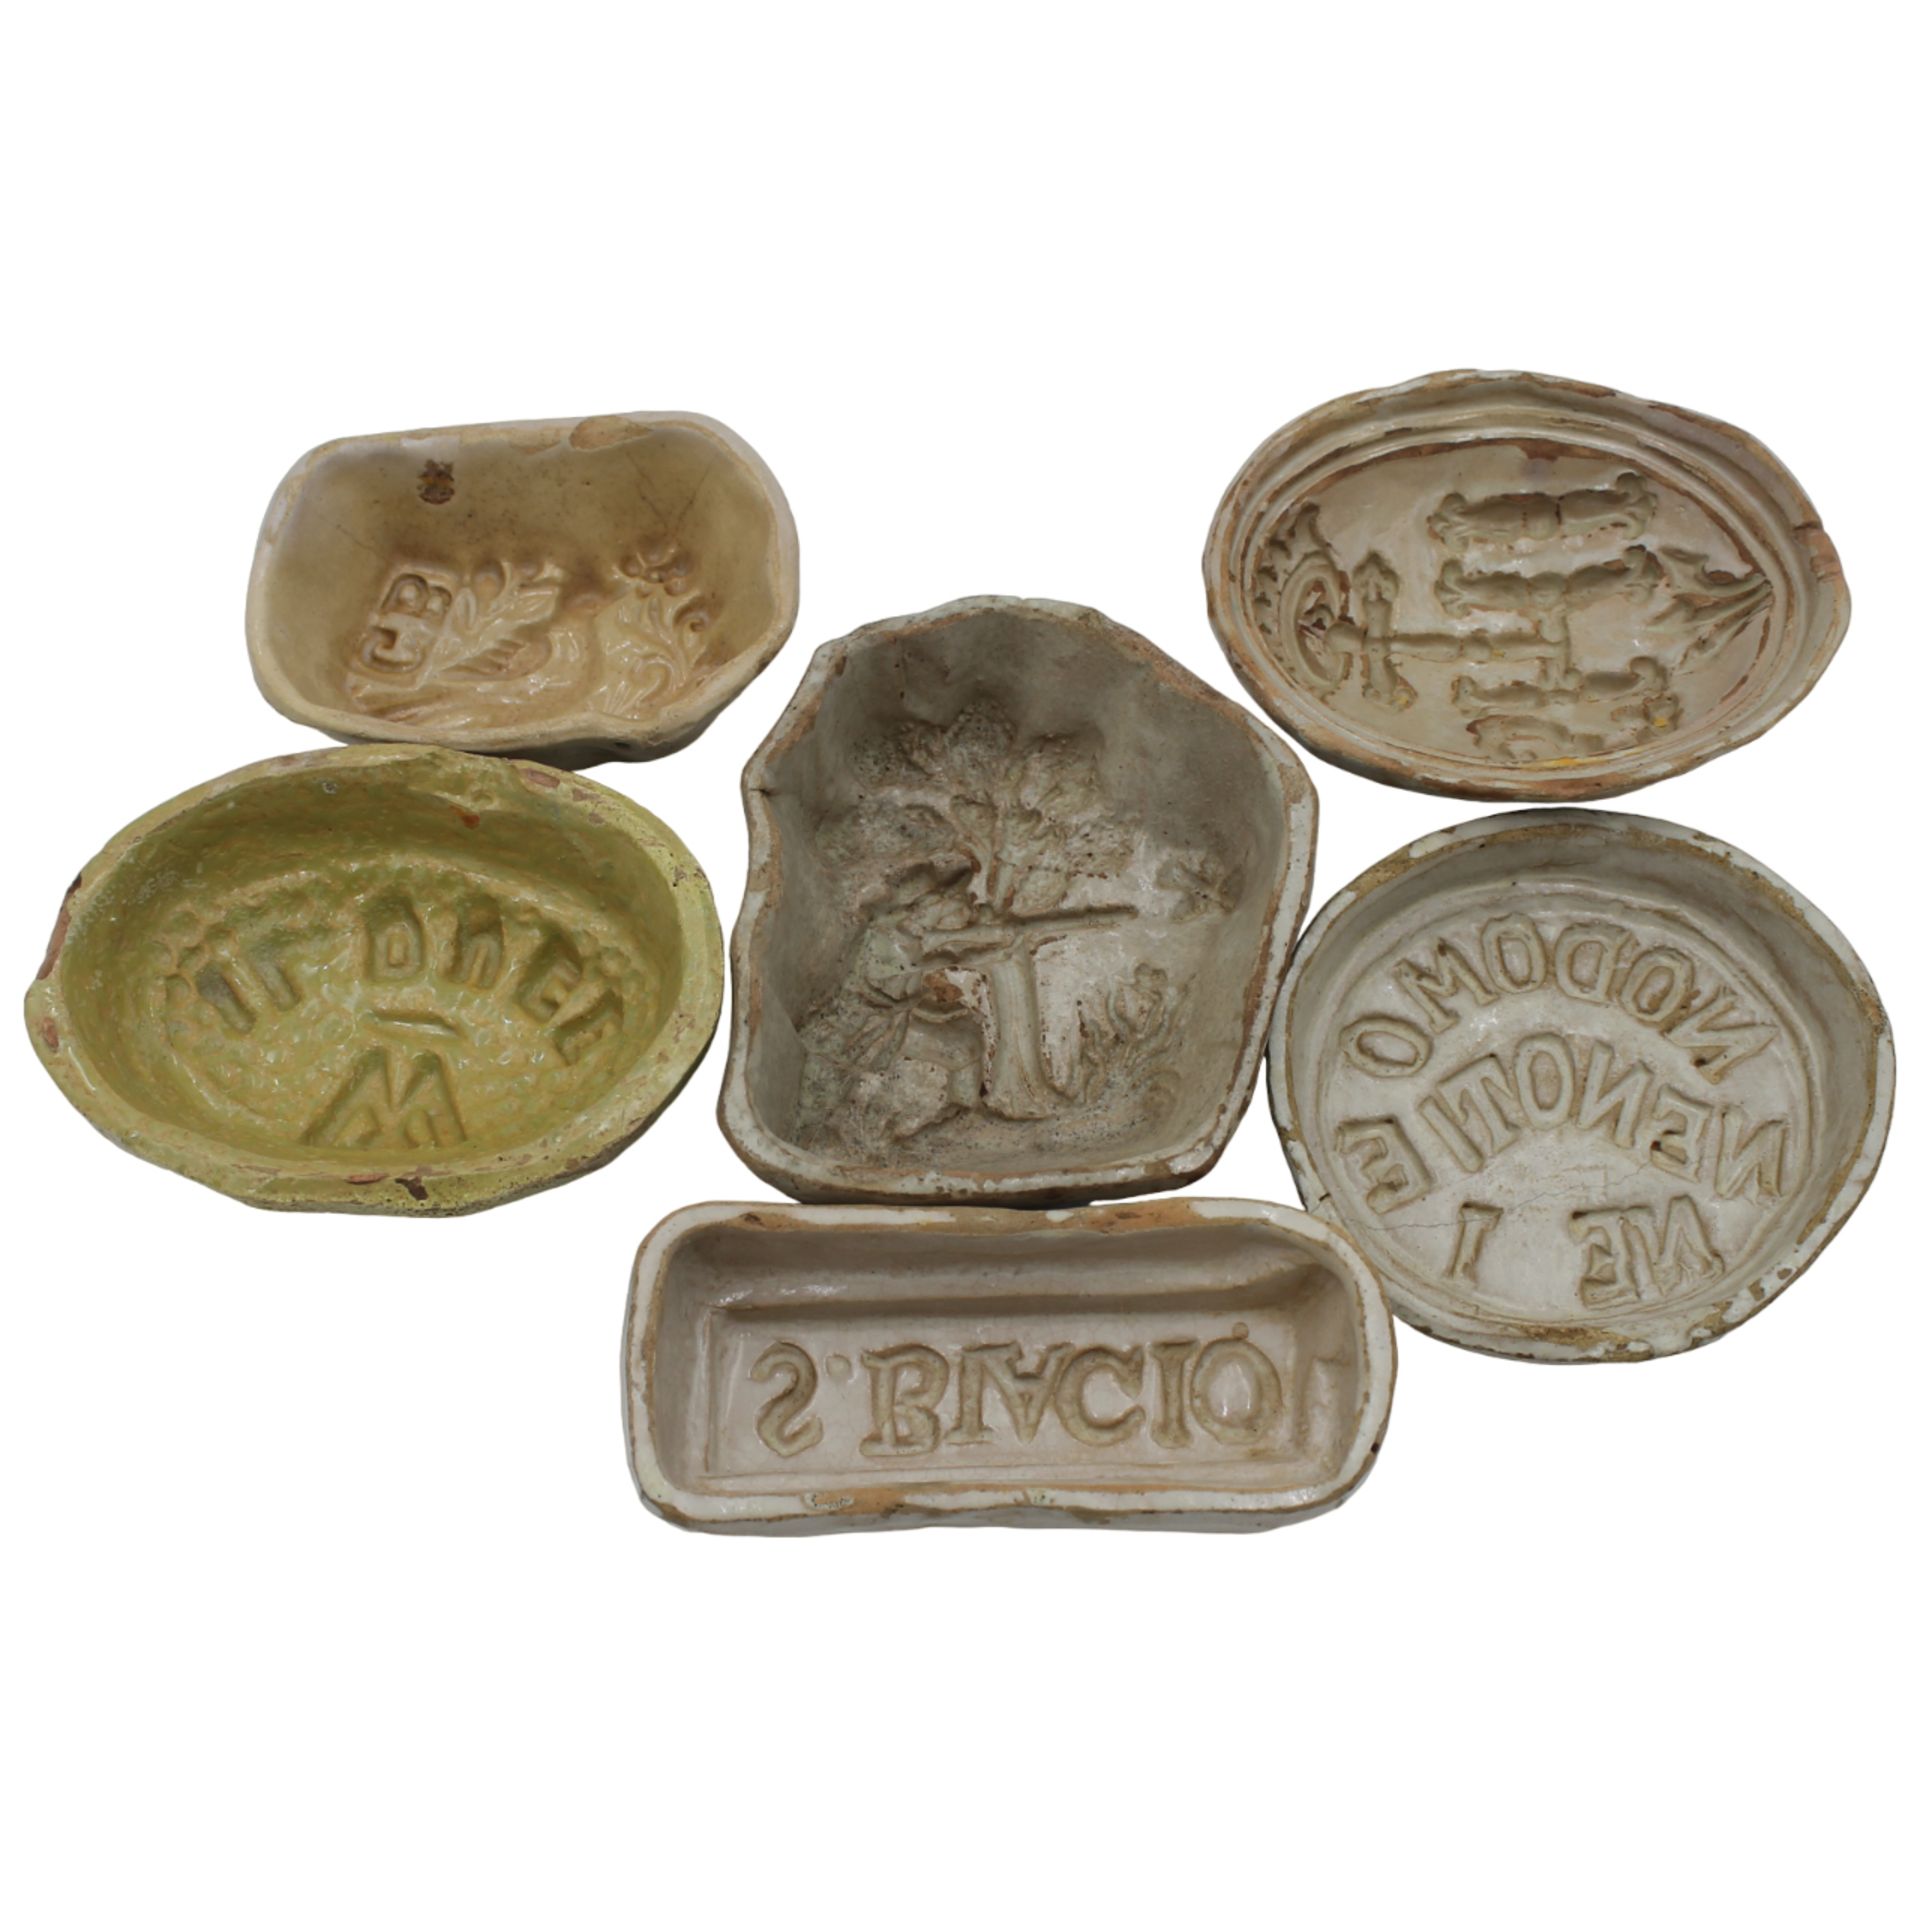 Lotto di sei formelle con scritte e stemmi - Lot of six molds with writings and coats of arms